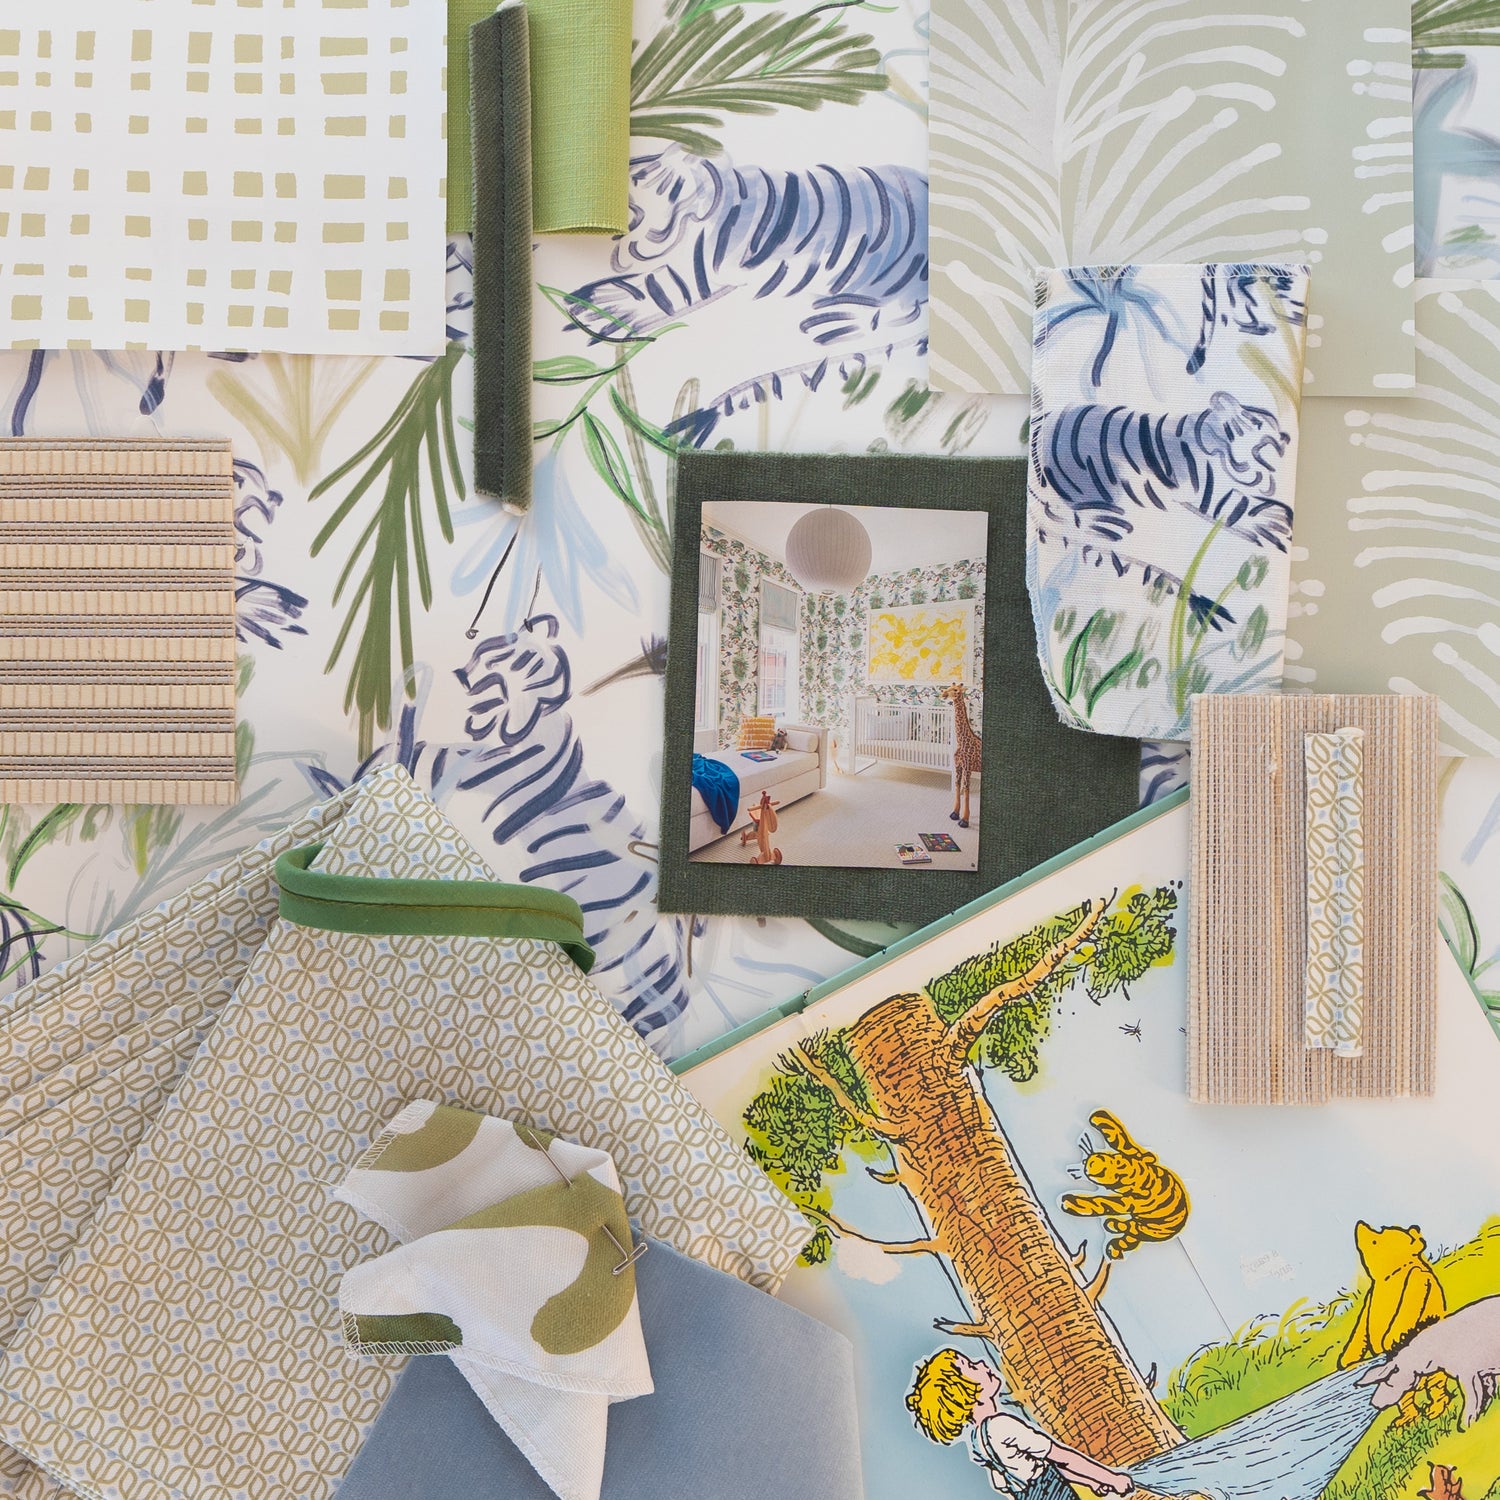 Interior design moodboard and fabric inspirations with Beige Botanical Stripe Printed Swatch, Blue Chinoiserie Printed Swatch and Moss Green Geometric Printed Swatch